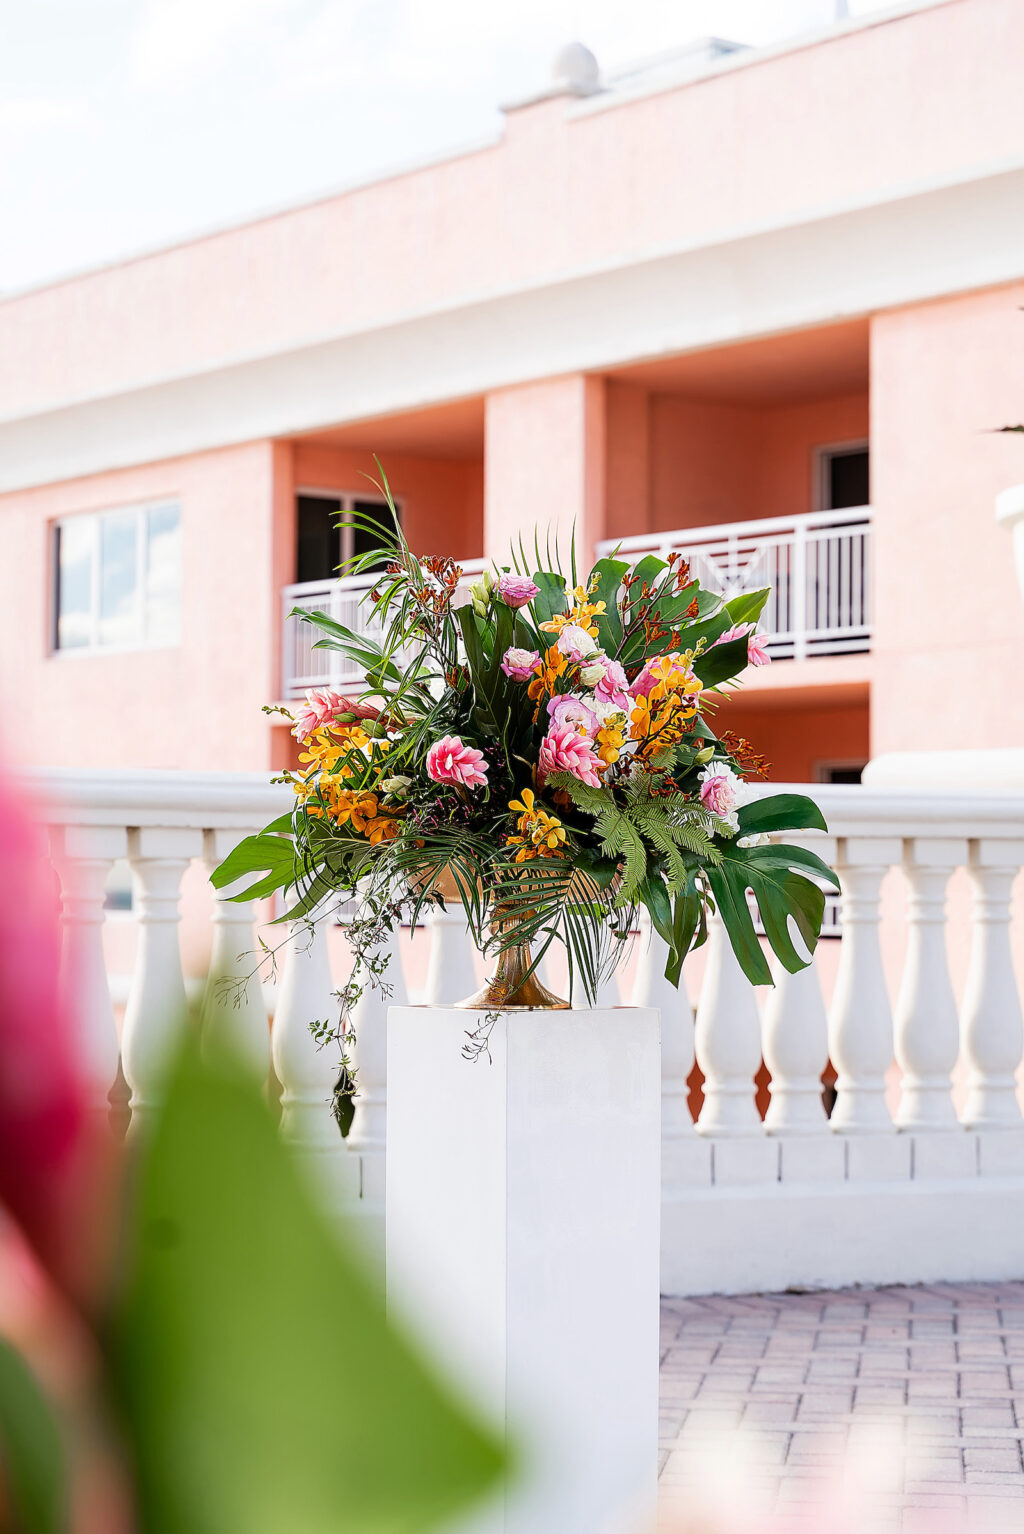 Tropical Rooftop Wedding Ceremony Decor, White Pedestal with Floral Arrangement, Monstera Palm Leaves, Pink Ginger, Yellow Flowers | Tampa Bay Wedding Photographer Limelight Photography | Clearwater Beach Wedding Venue Hyatt Regency Clearwater Beach